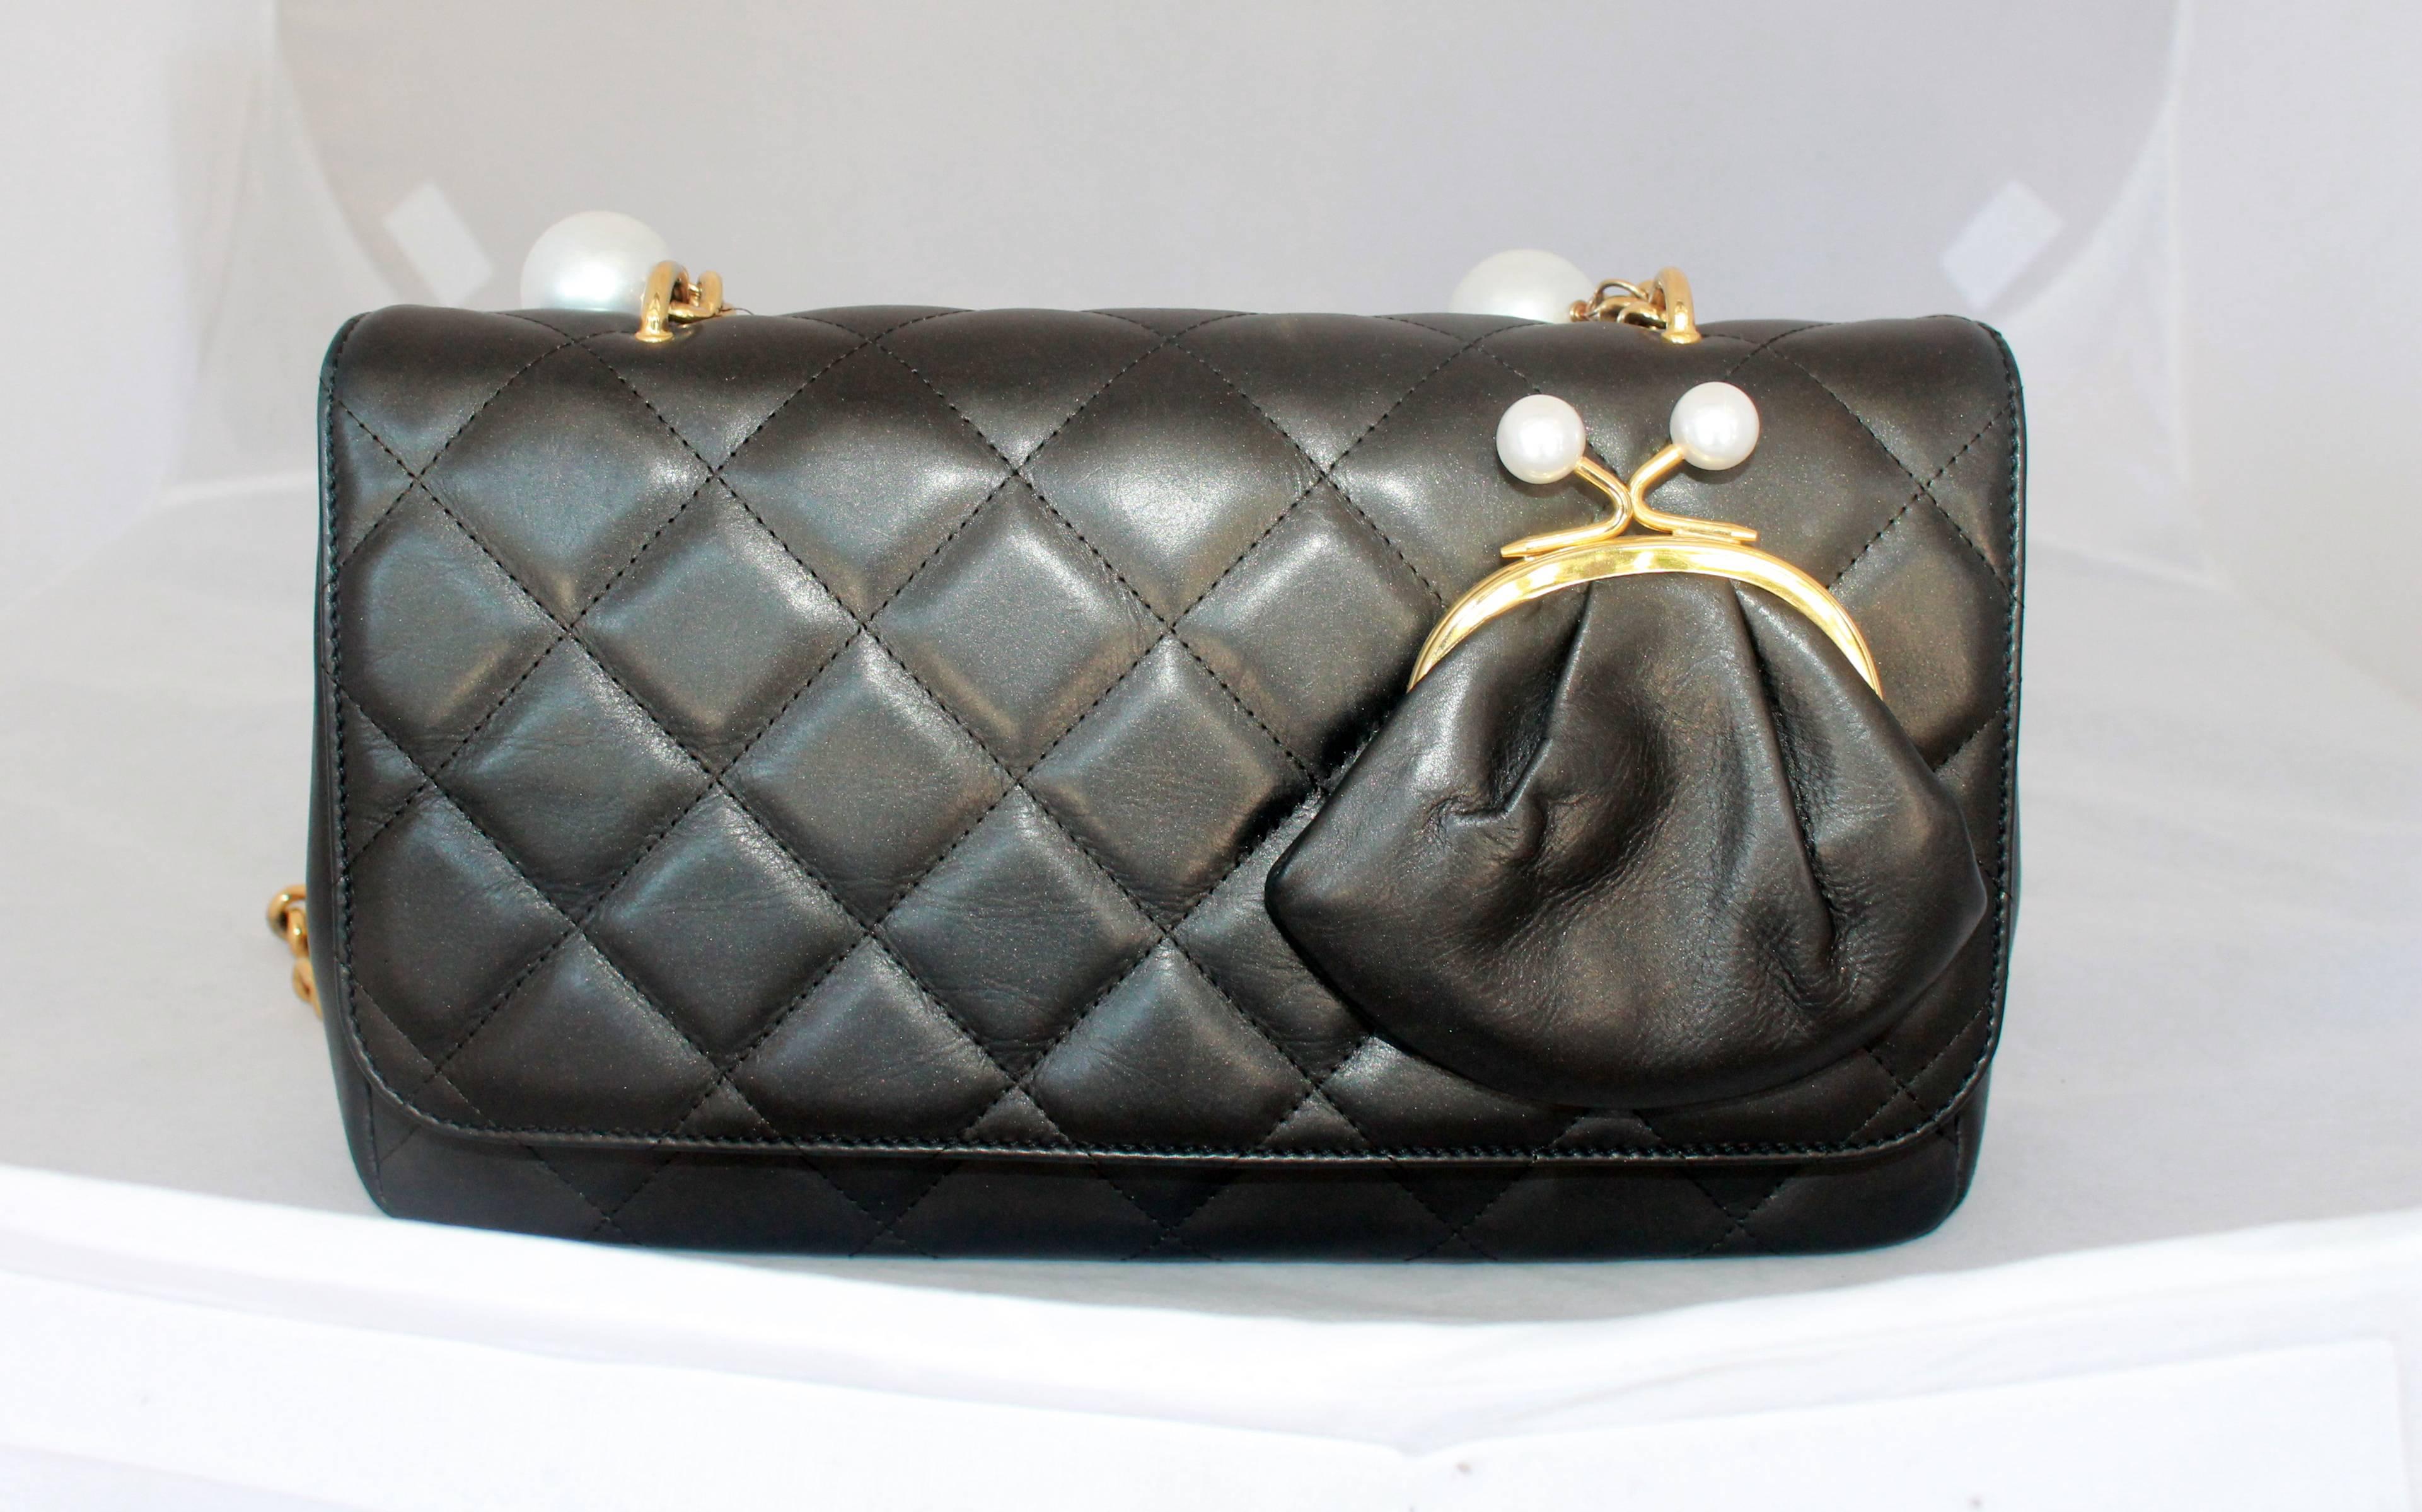 This Moschino pearlized black lambskin quilted crossbody bag is in excellent condition. It has a coin purse attached to the front that has a pearl top snap closure with a think gold link strap with over 20 hanging multi size pearls. The interior has